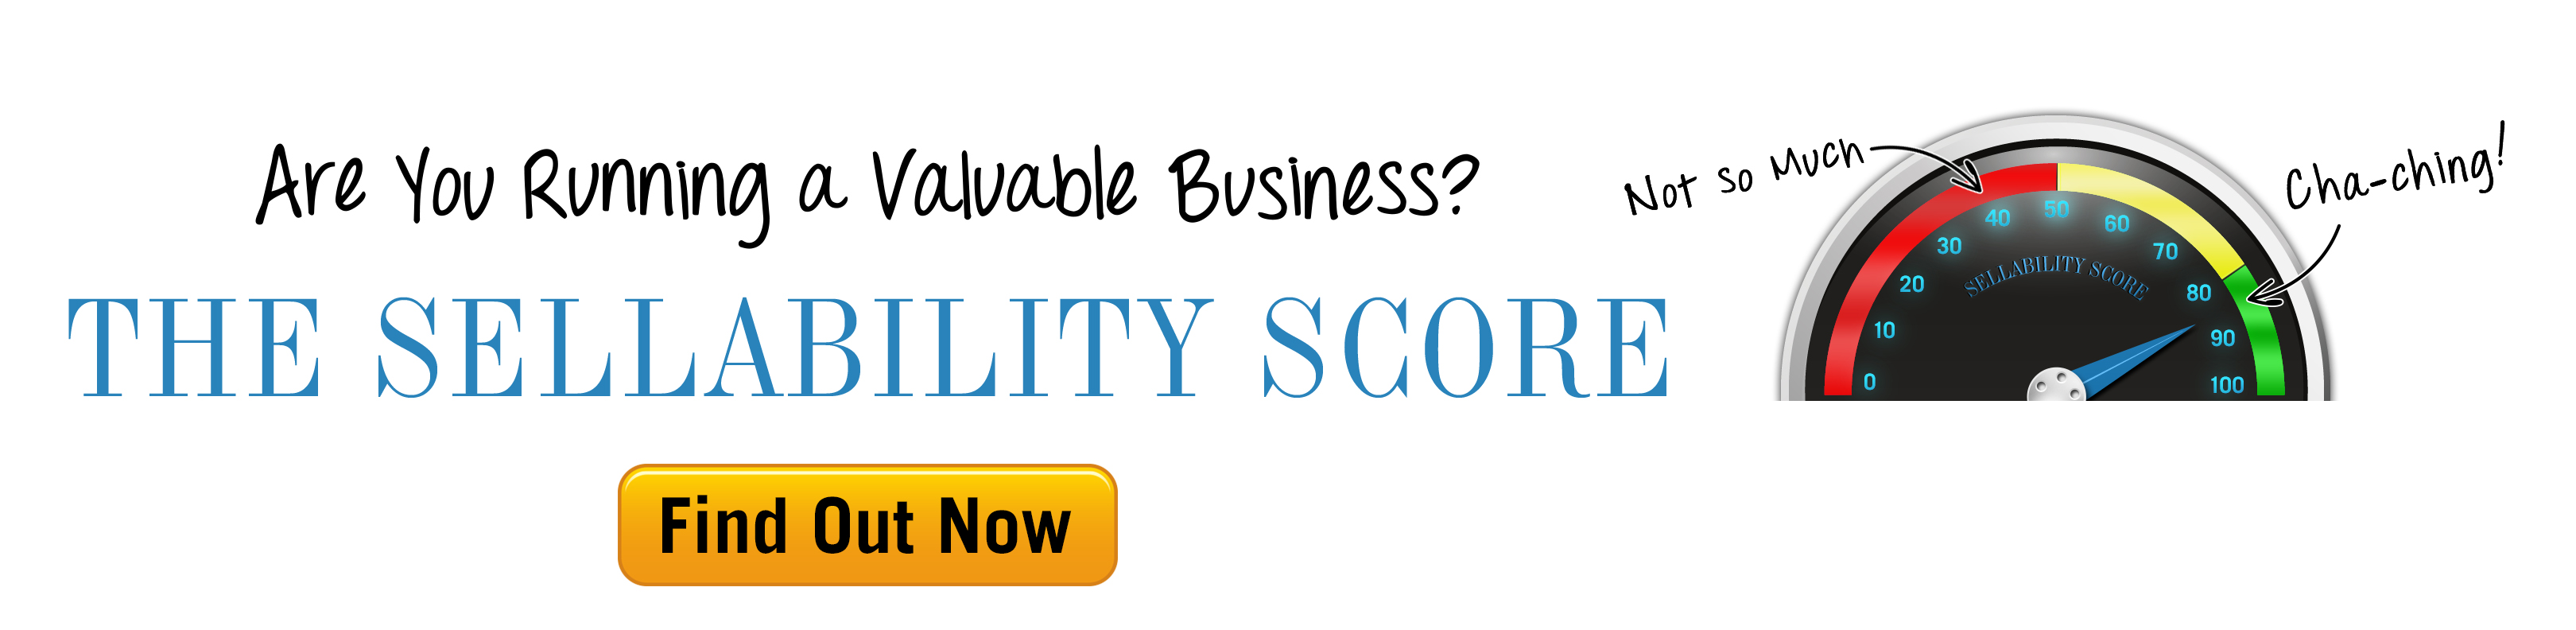 Sellability Score Find Out Now